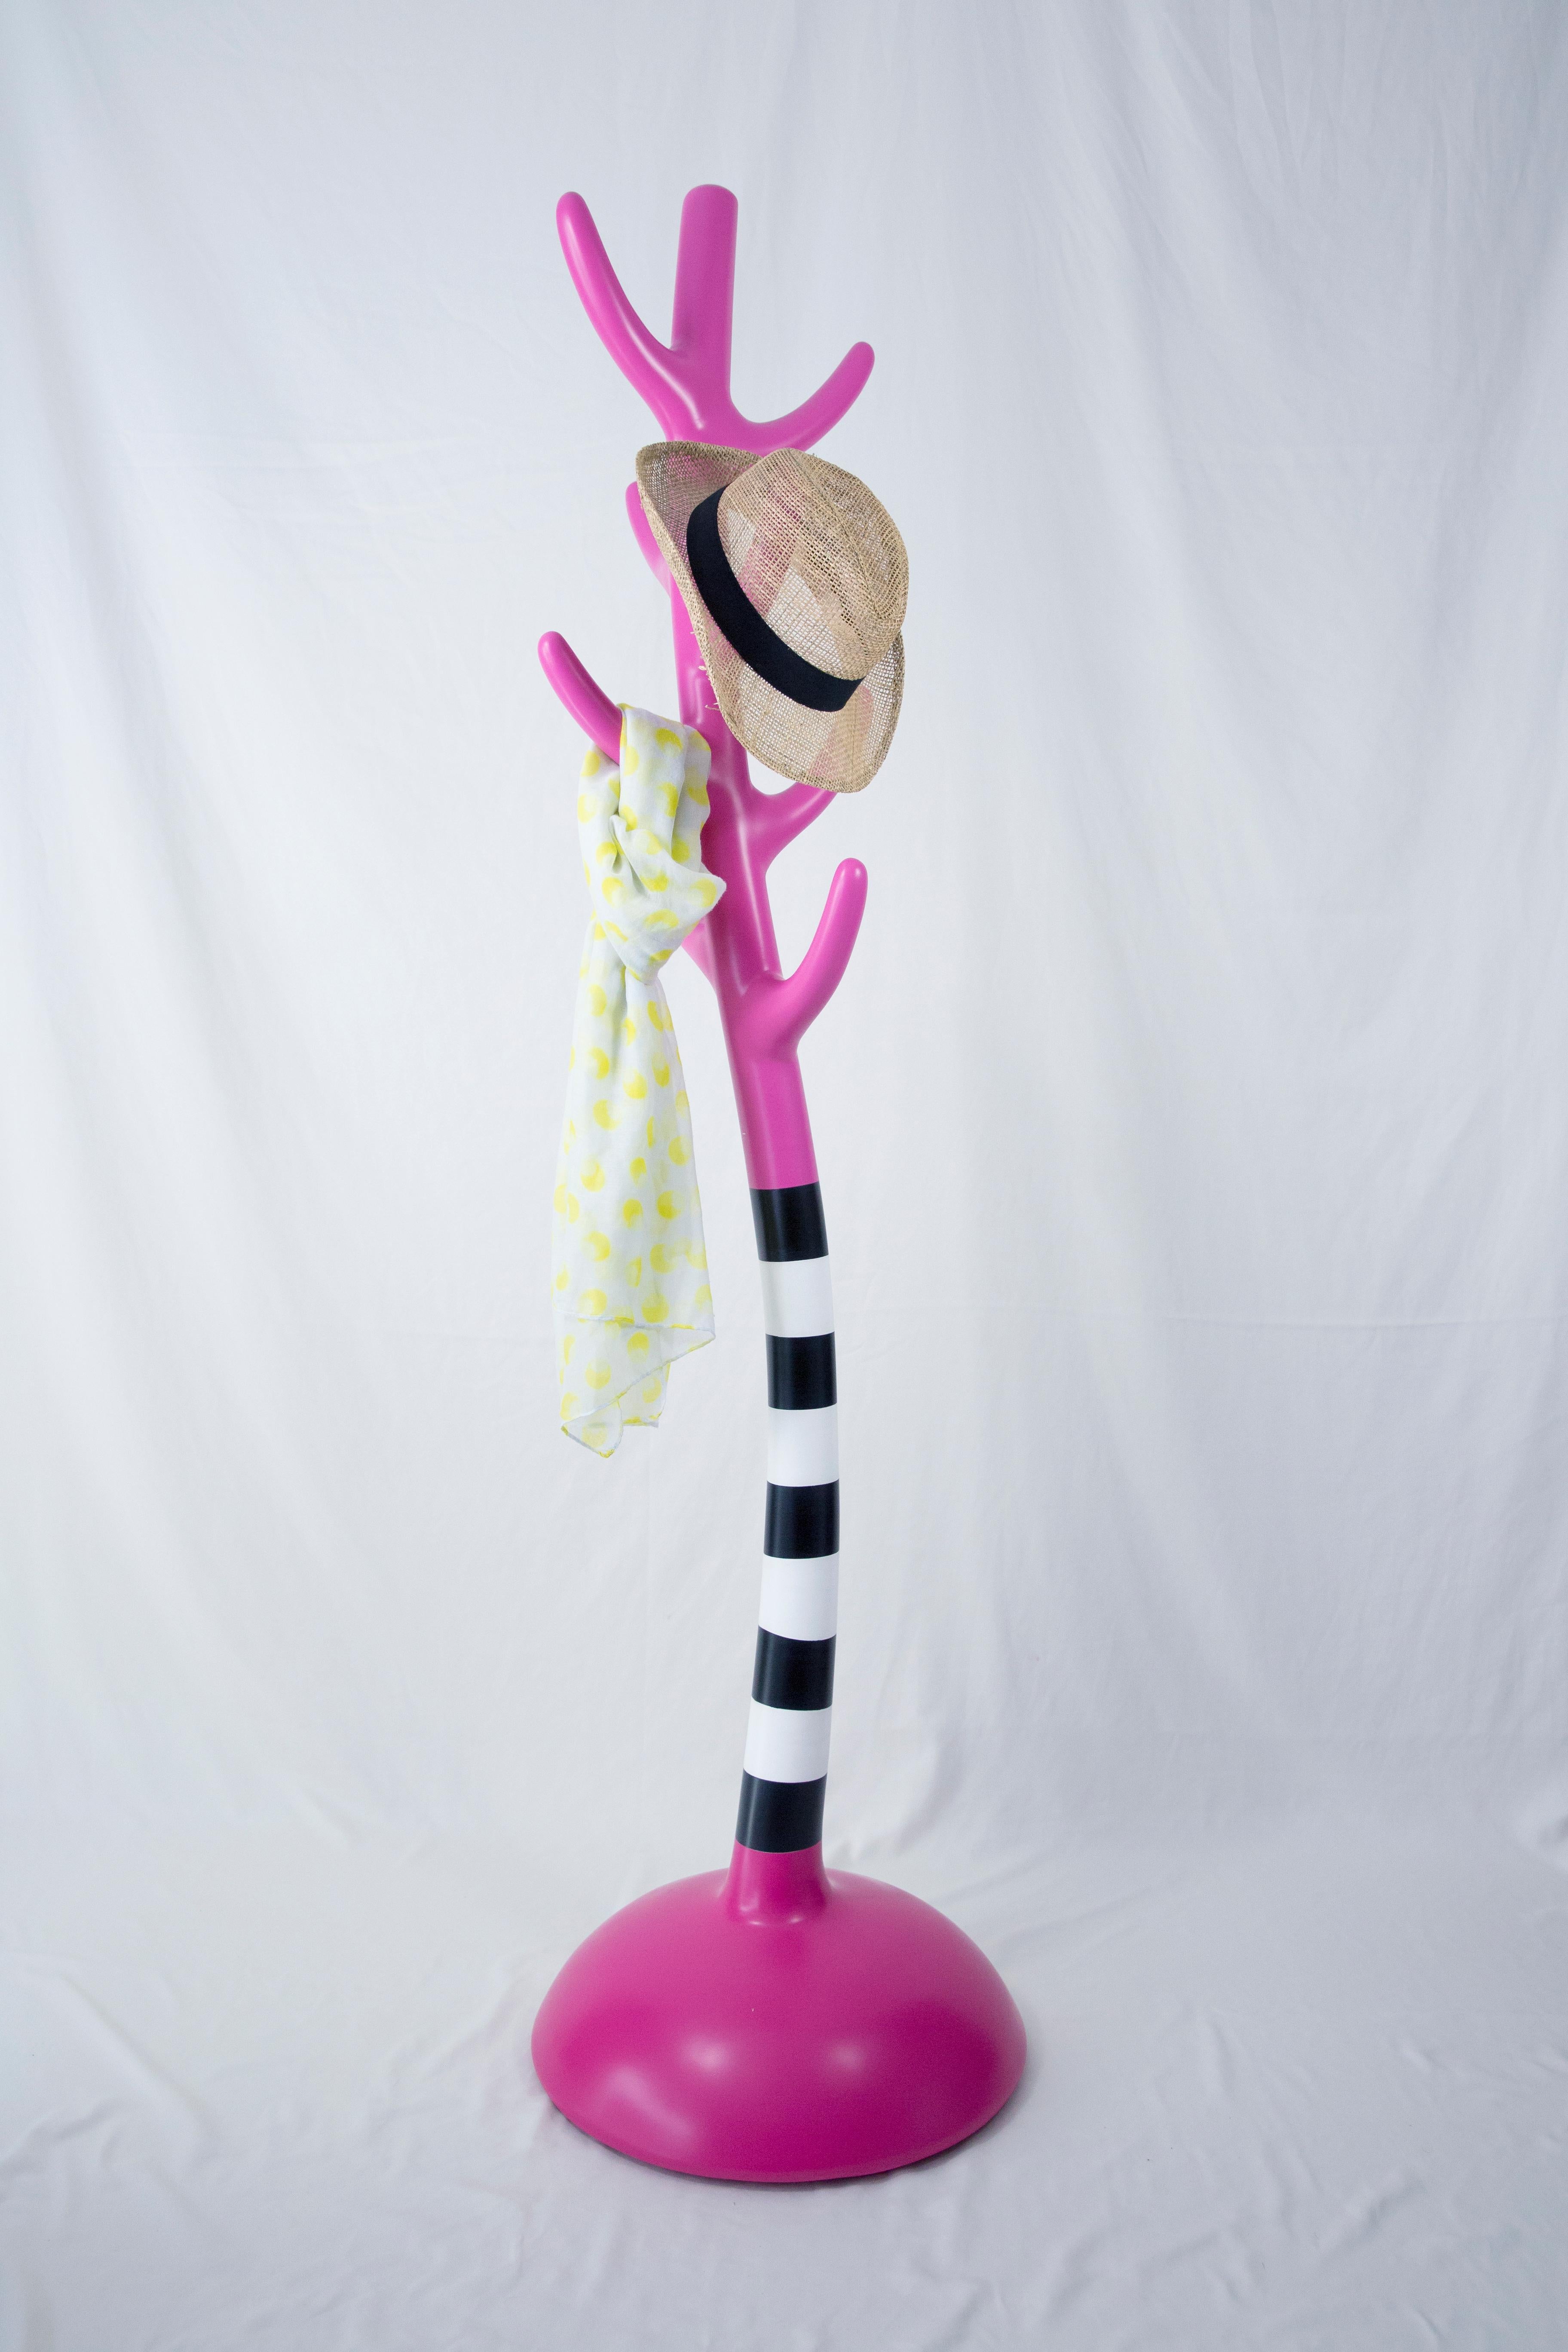 Crooked Pink Colourful Coat Rack, Amorphous Sculpture, Artistic In New Condition For Sale In Istanbul, Maltepe